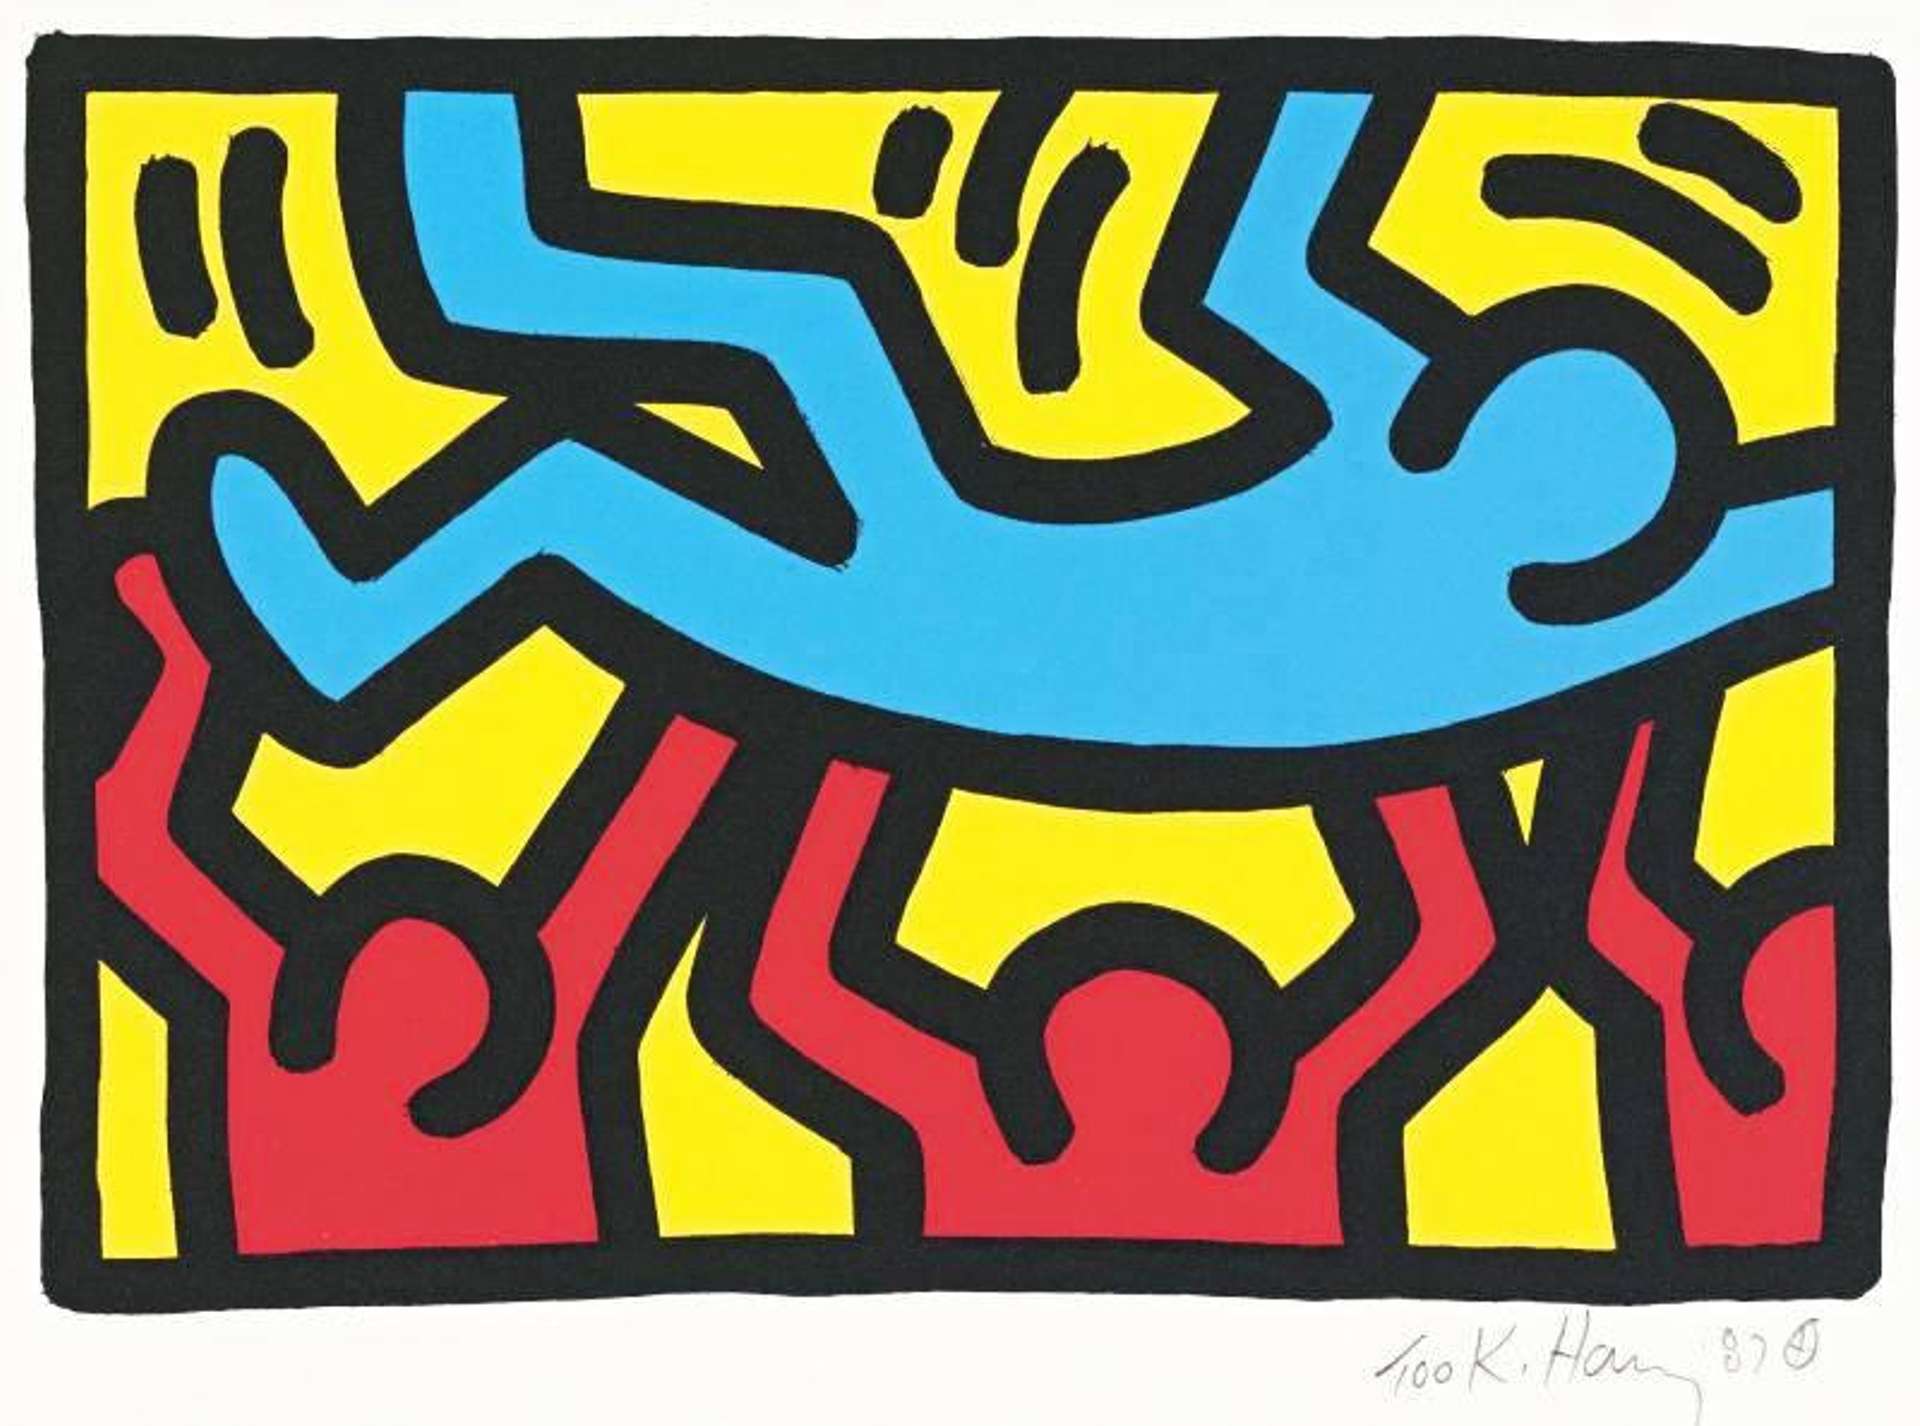 An image of Untitled (1987) by Keith Haring. It shows three red figures lifting up a dancing blue figure who is laying horizontally. They are against a yellow background.